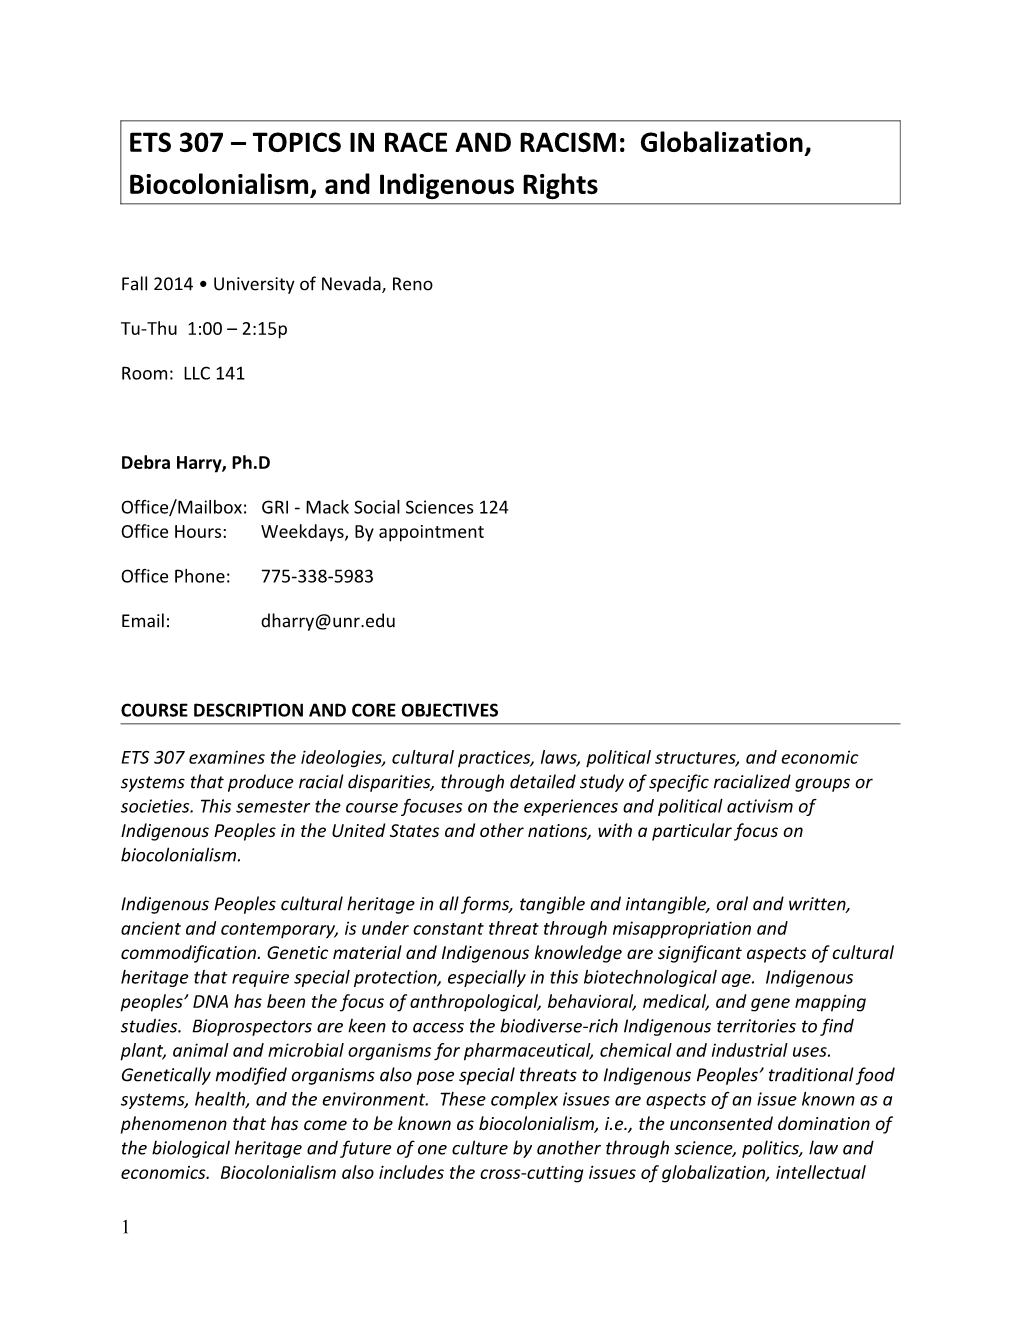 ETS 307 TOPICS in RACE and RACISM: Globalization, Biocolonialism, and Indigenous Rights